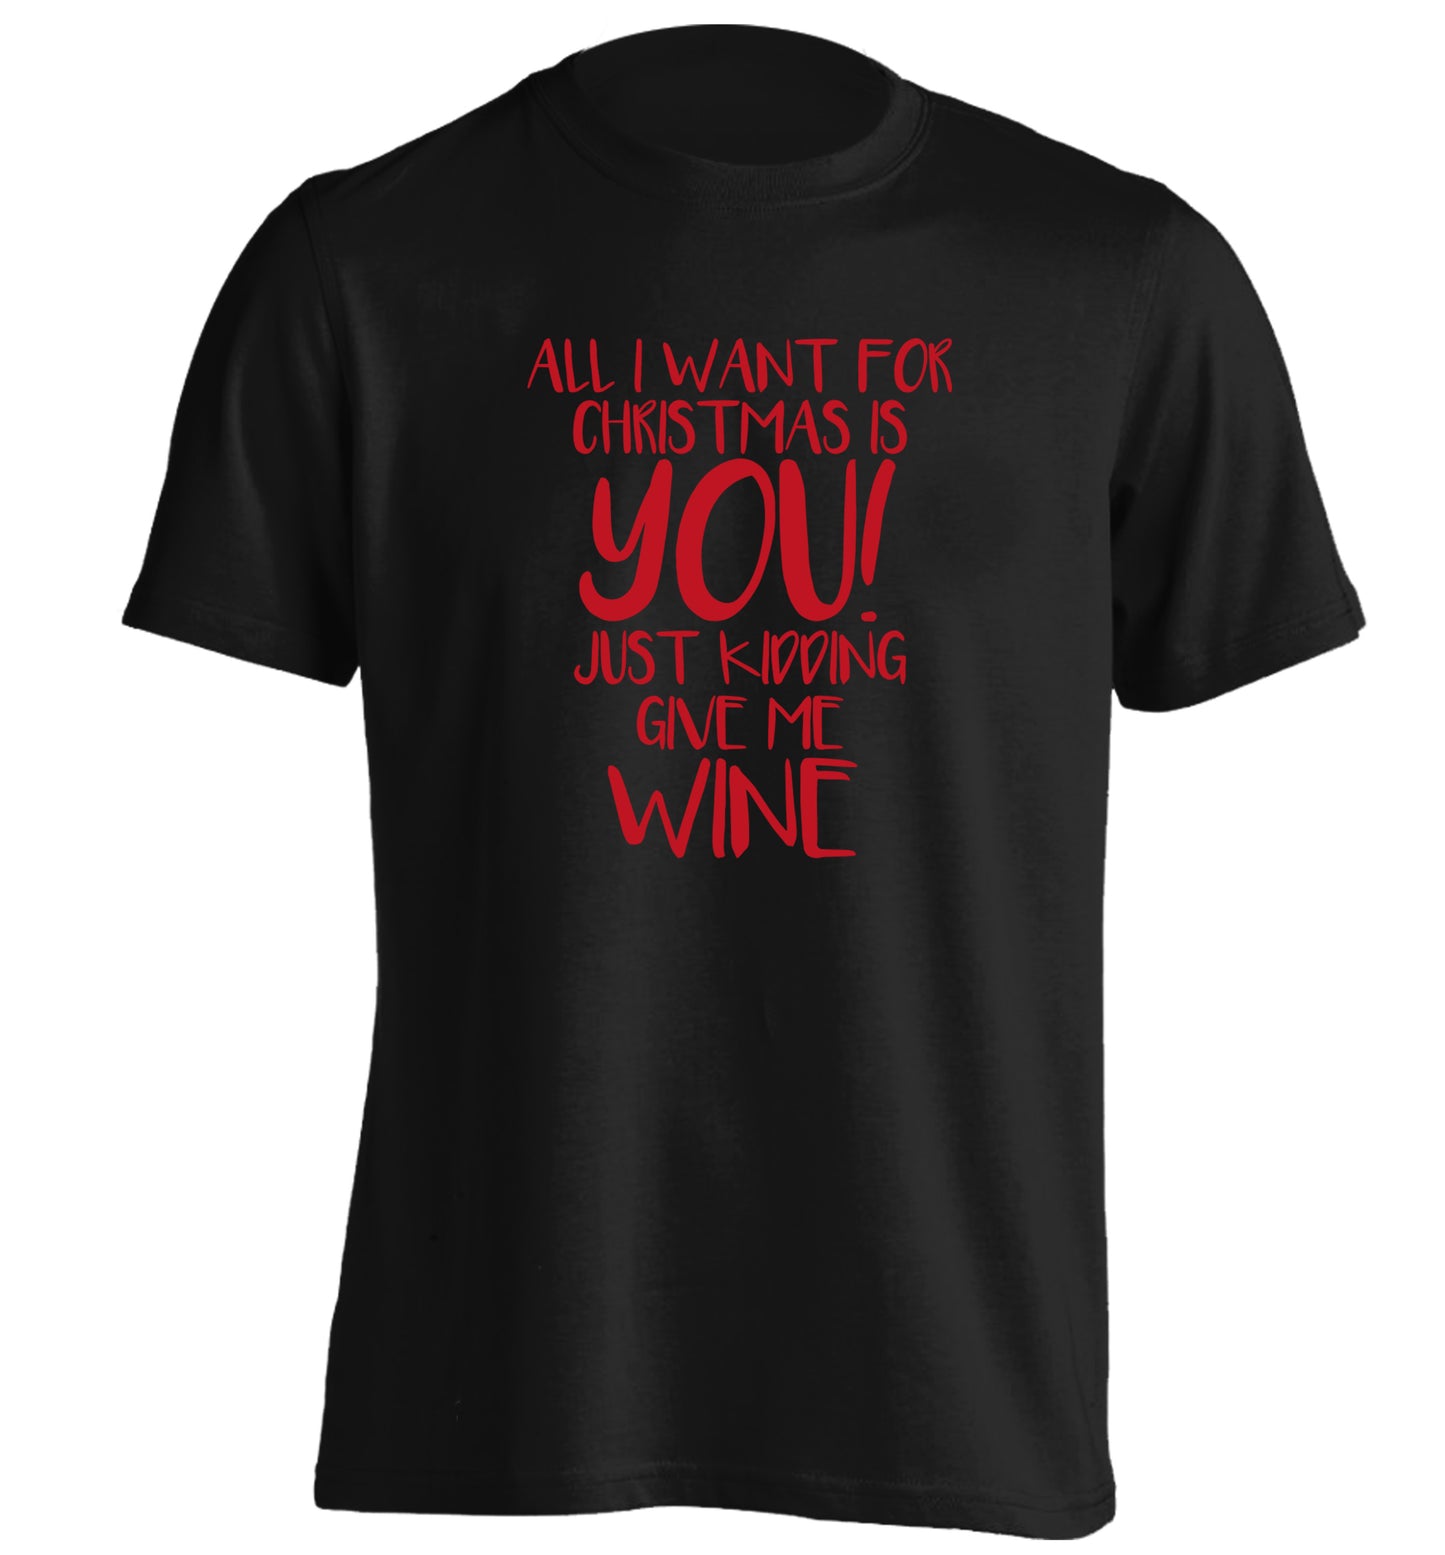 All I want for christmas is you just kidding give me the wine adults unisex black Tshirt 2XL